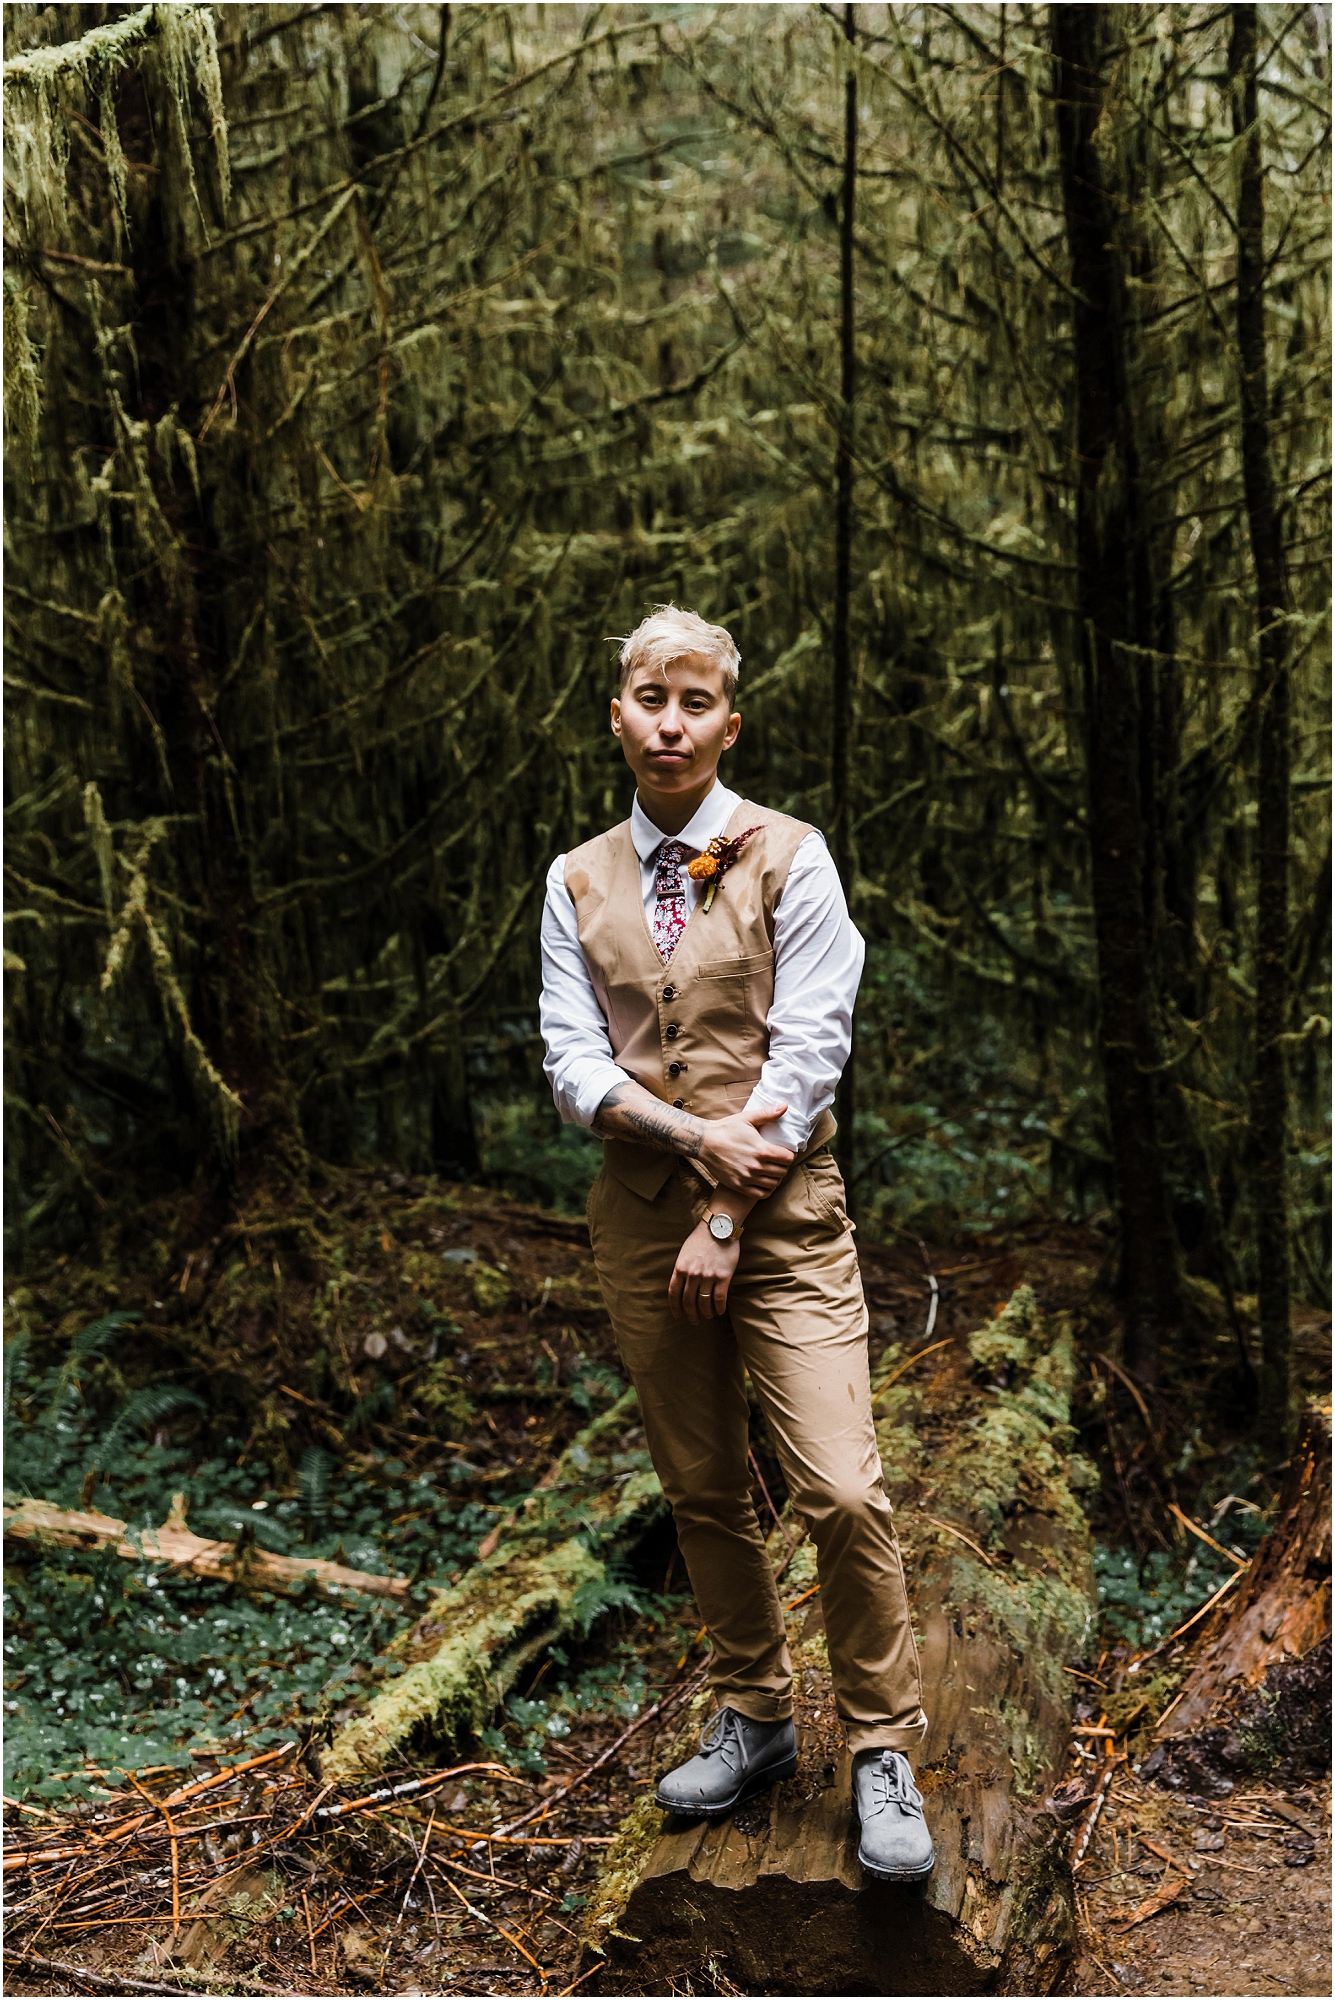 A handsome LGBTQ+ groom wearing a tan vest and pants with a light gray button down top and an orange marigold boutonniere stands among the lush mossy forest for his PNW hiking adventure elopement. | Erica Swantek Photography 